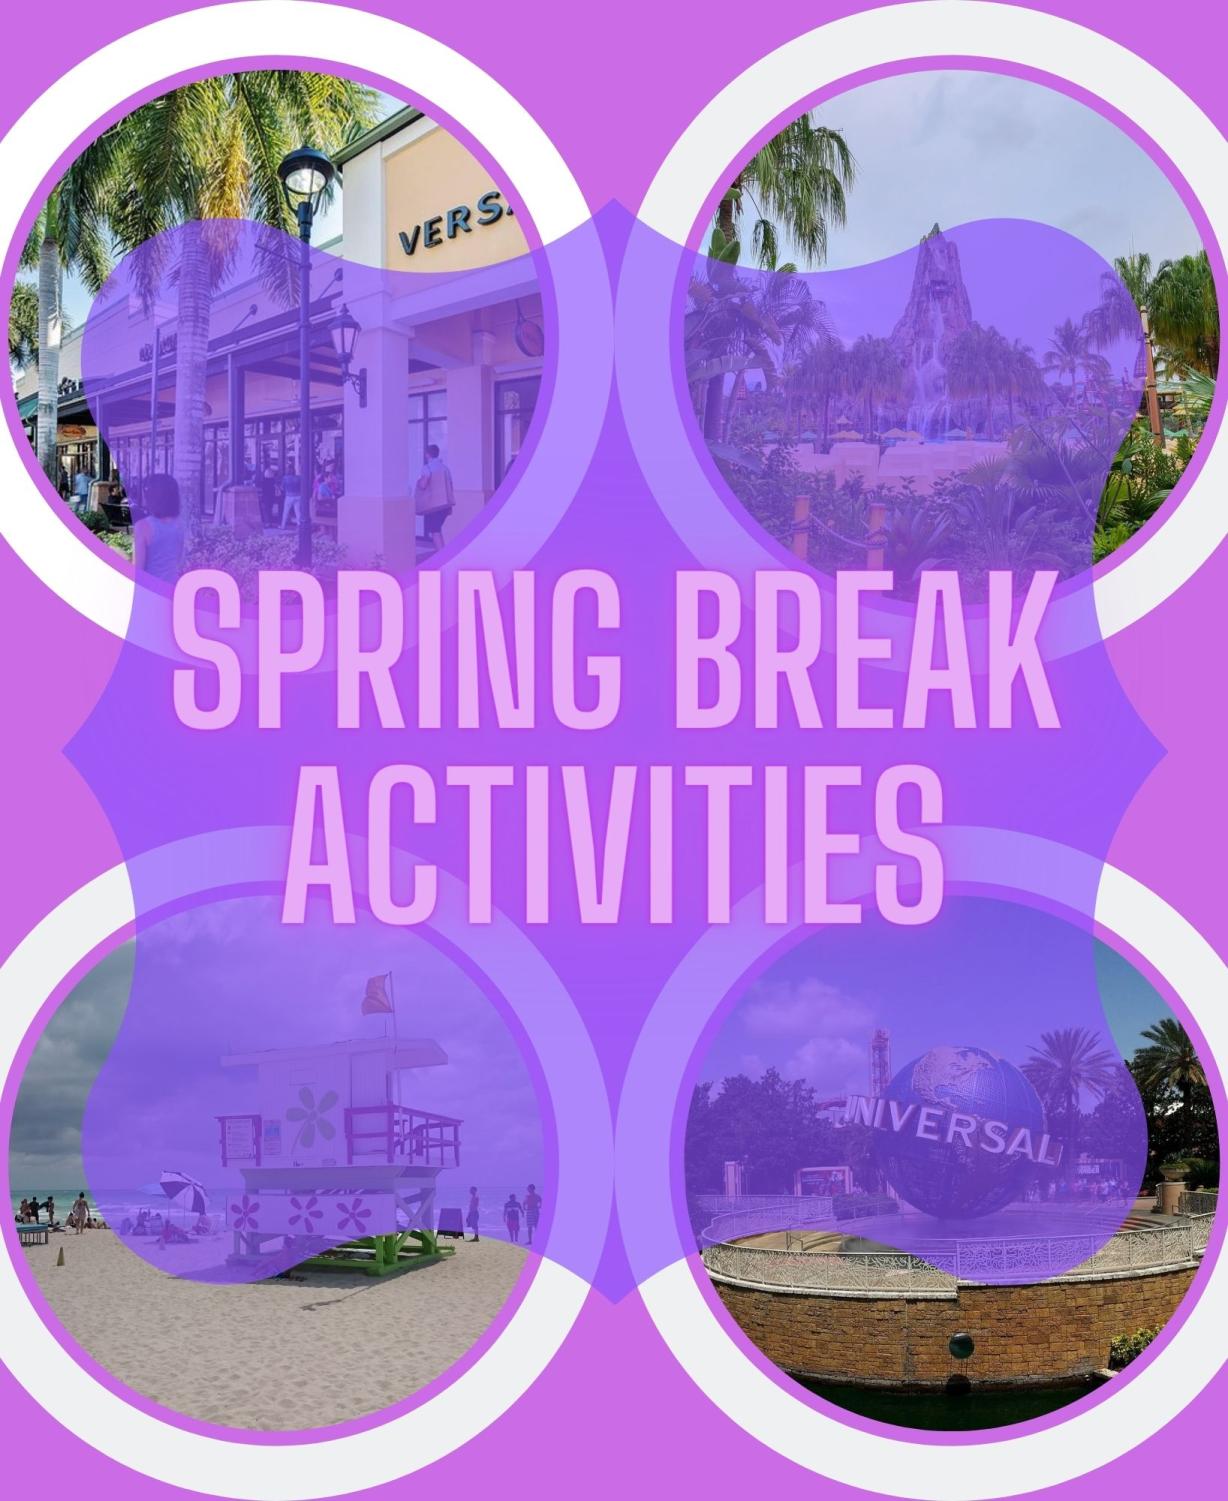 CHAT News Activities to Spice up Your Spring Break